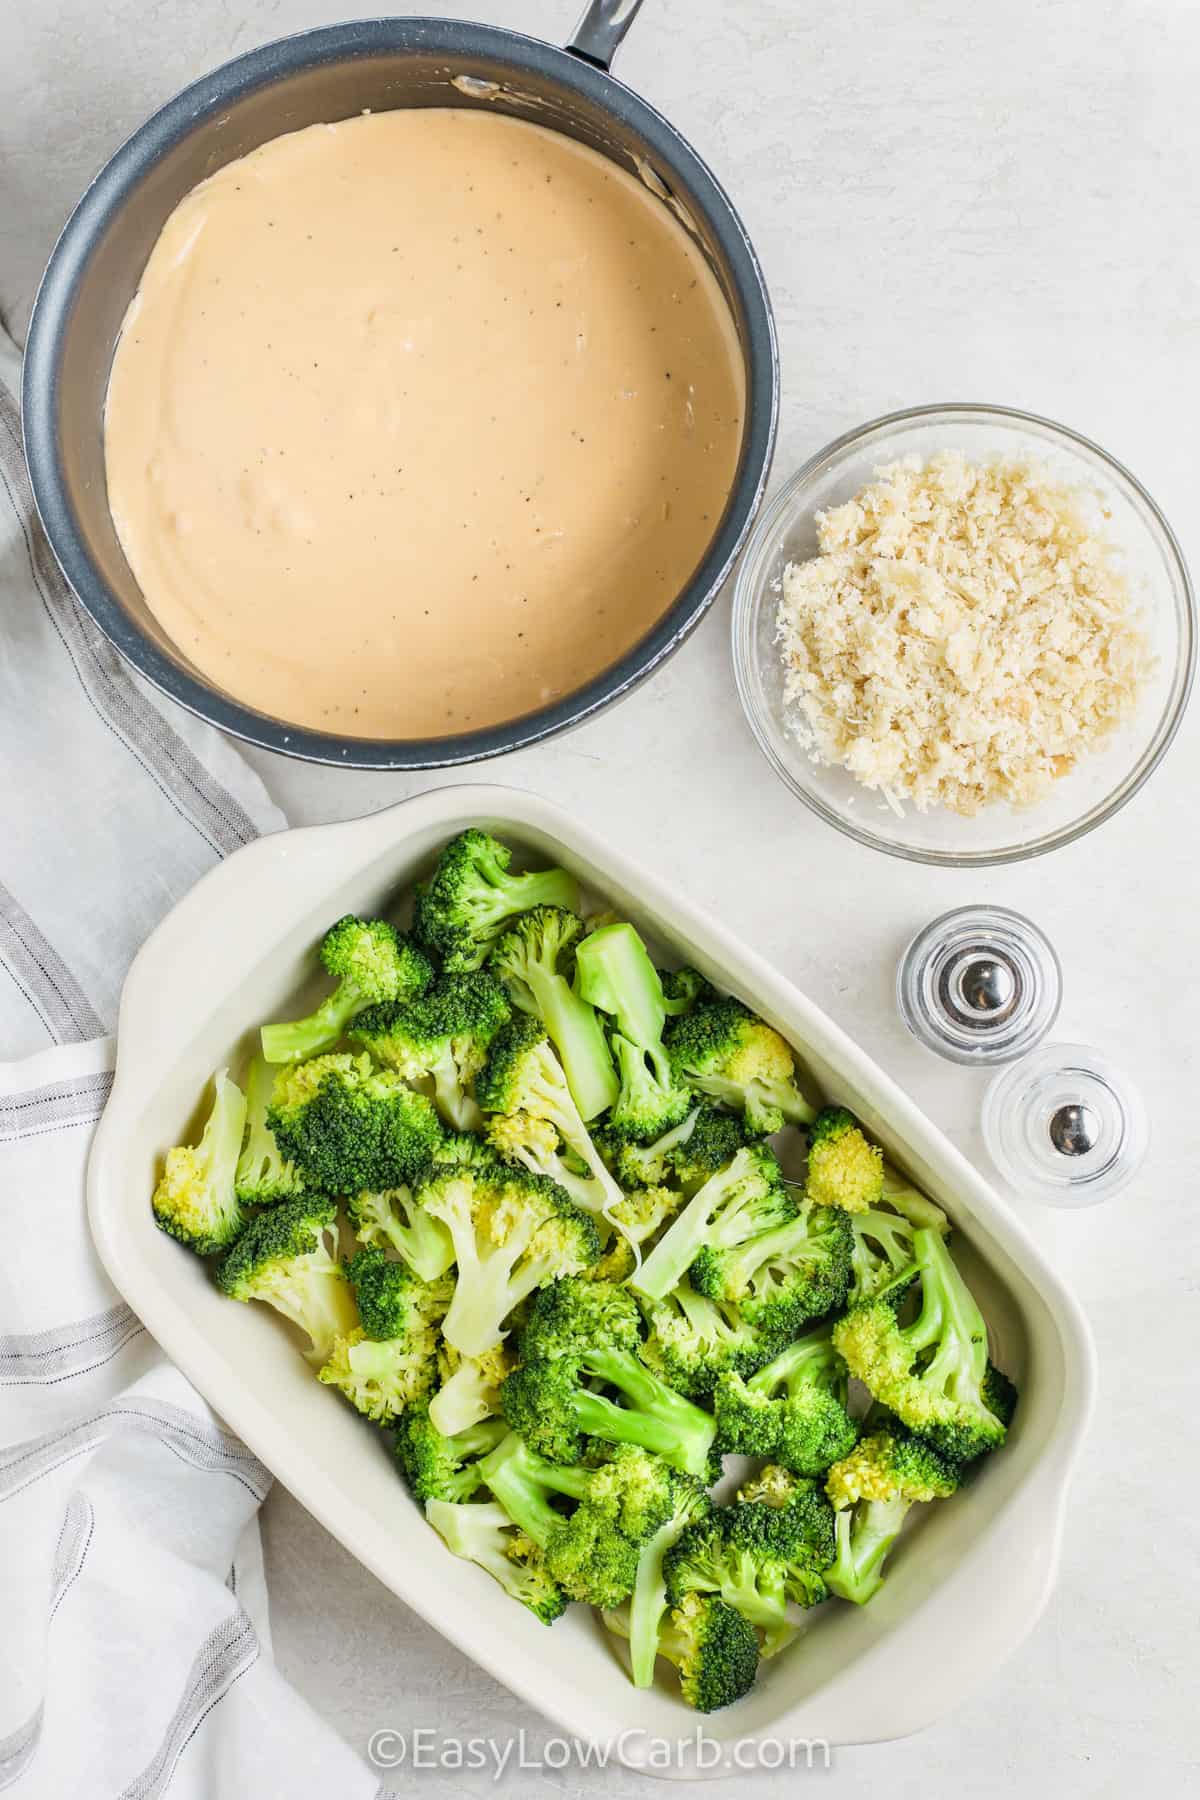 sauce , broccoli and toppings in dishes to make Broccoli au Gratin